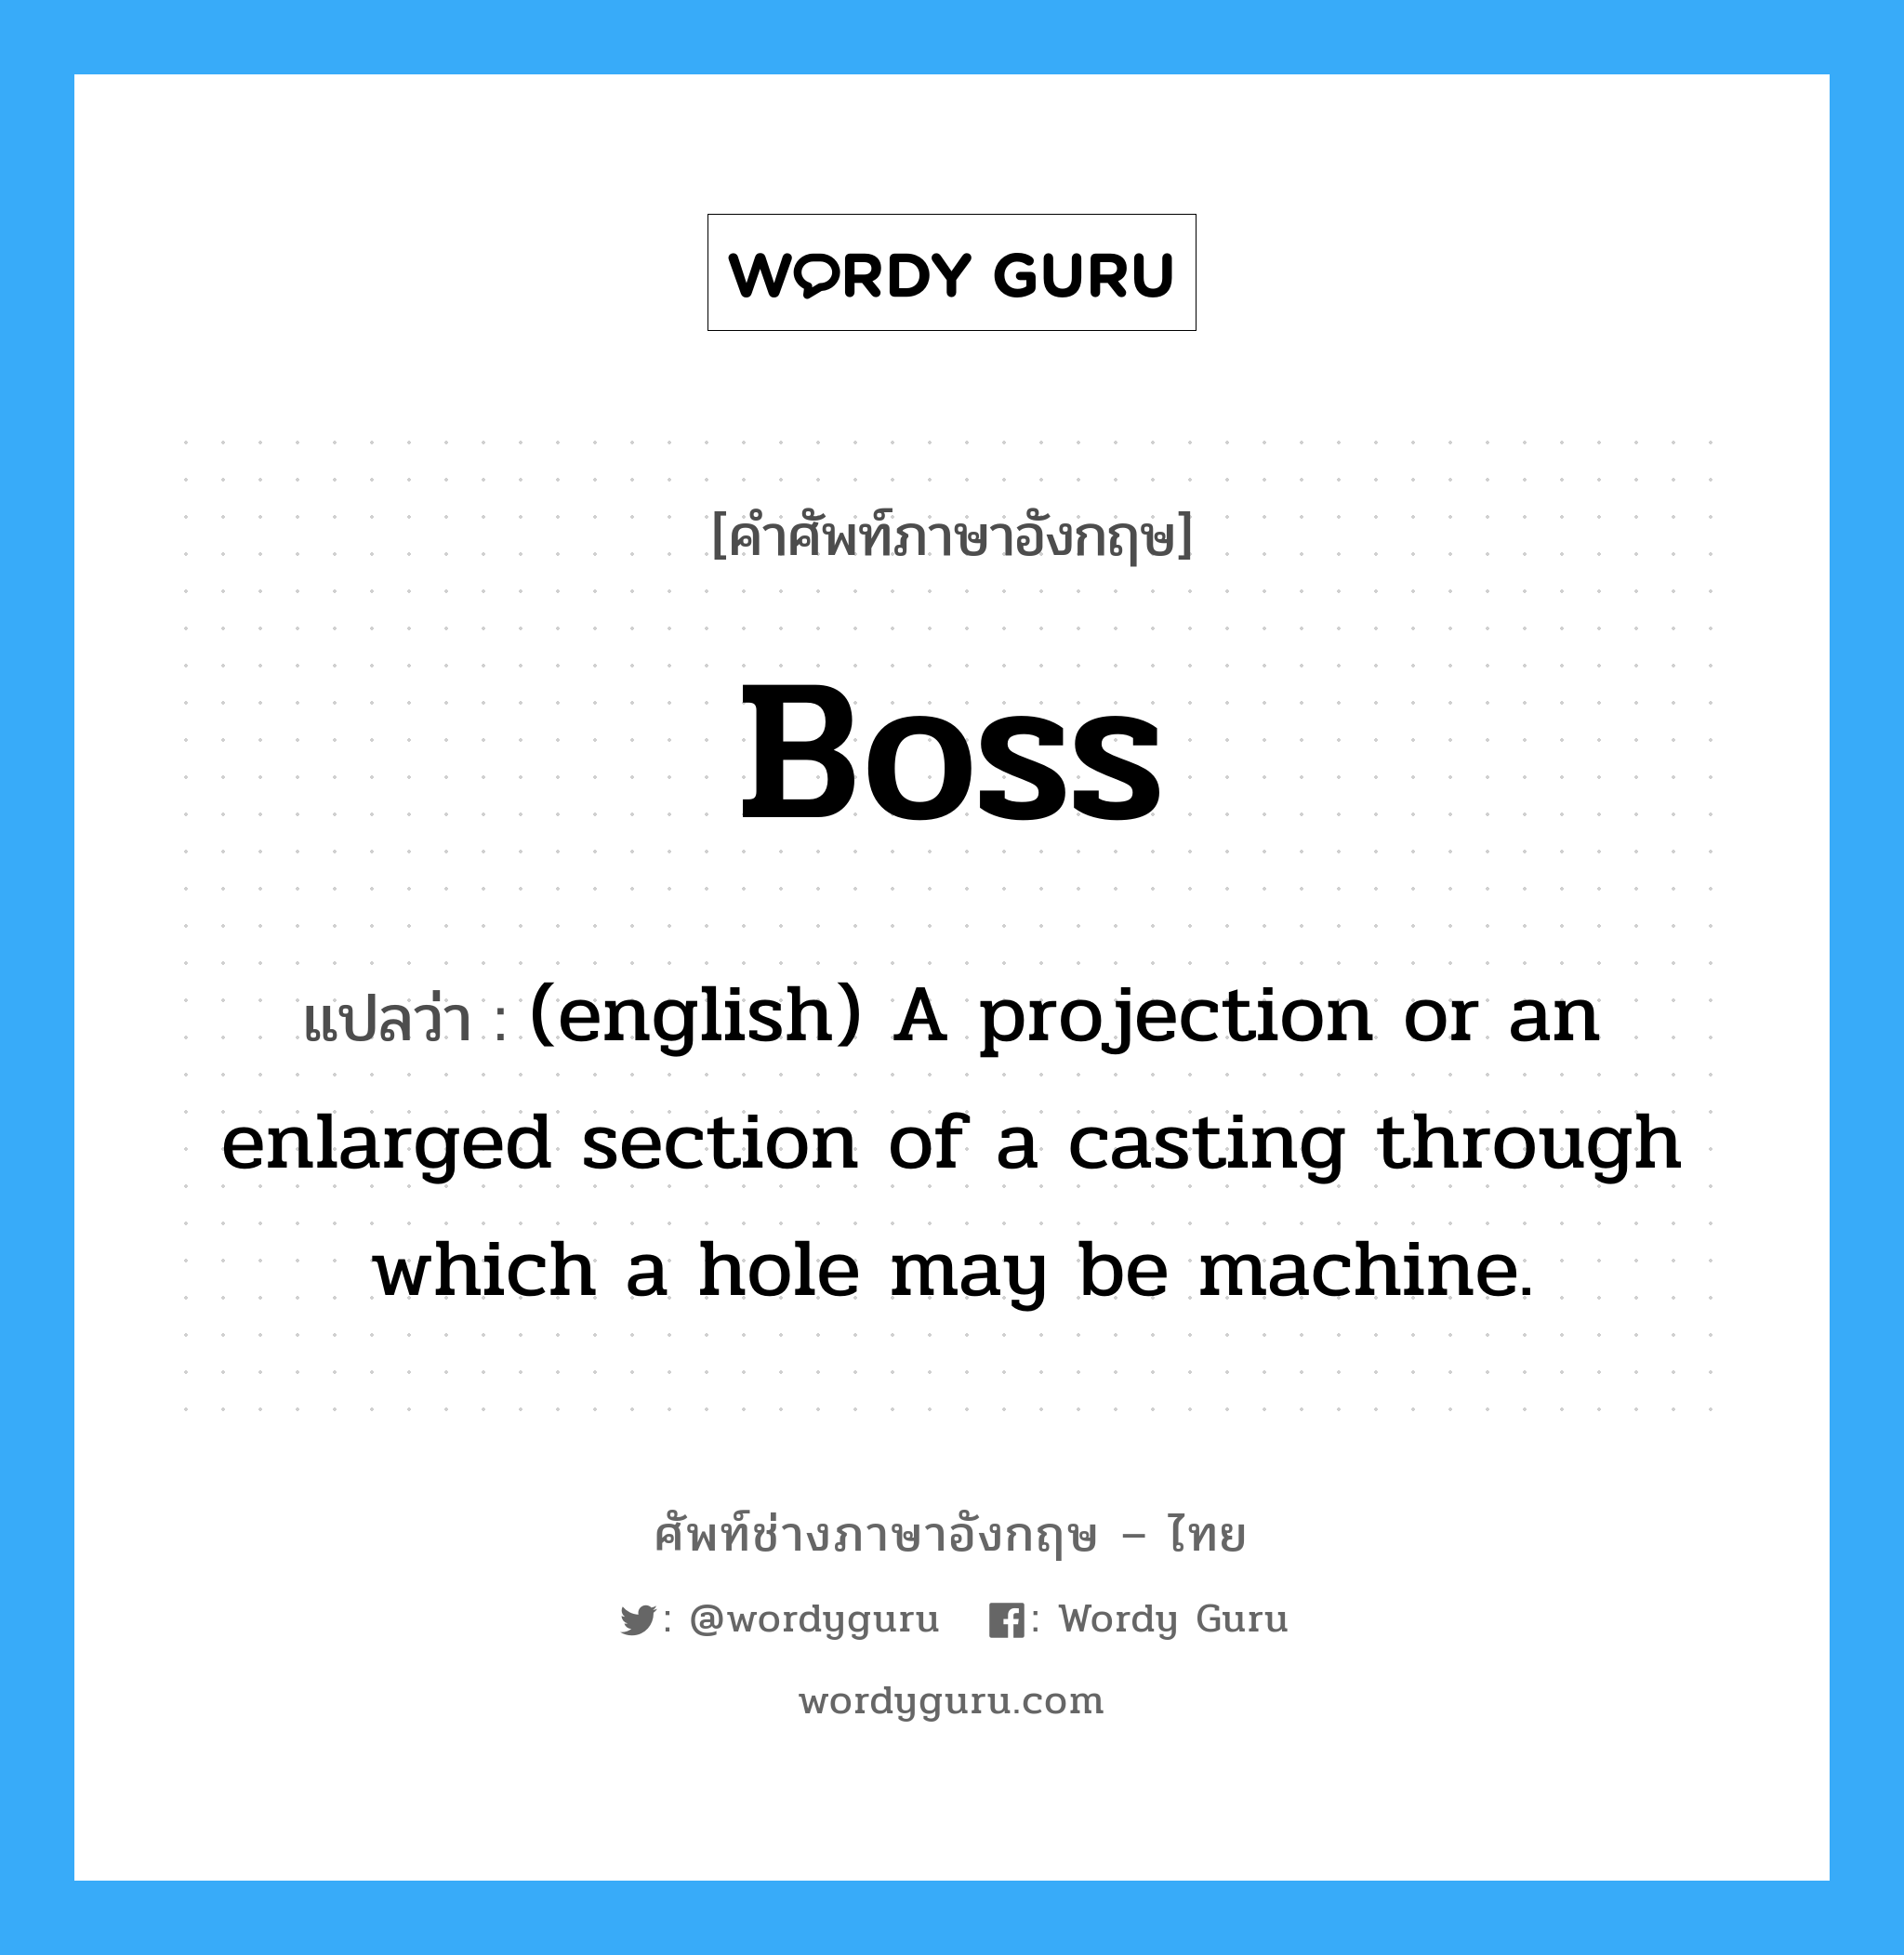 Boss แปลว่า?, คำศัพท์ช่างภาษาอังกฤษ - ไทย Boss คำศัพท์ภาษาอังกฤษ Boss แปลว่า (english) A projection or an enlarged section of a casting through which a hole may be machine.